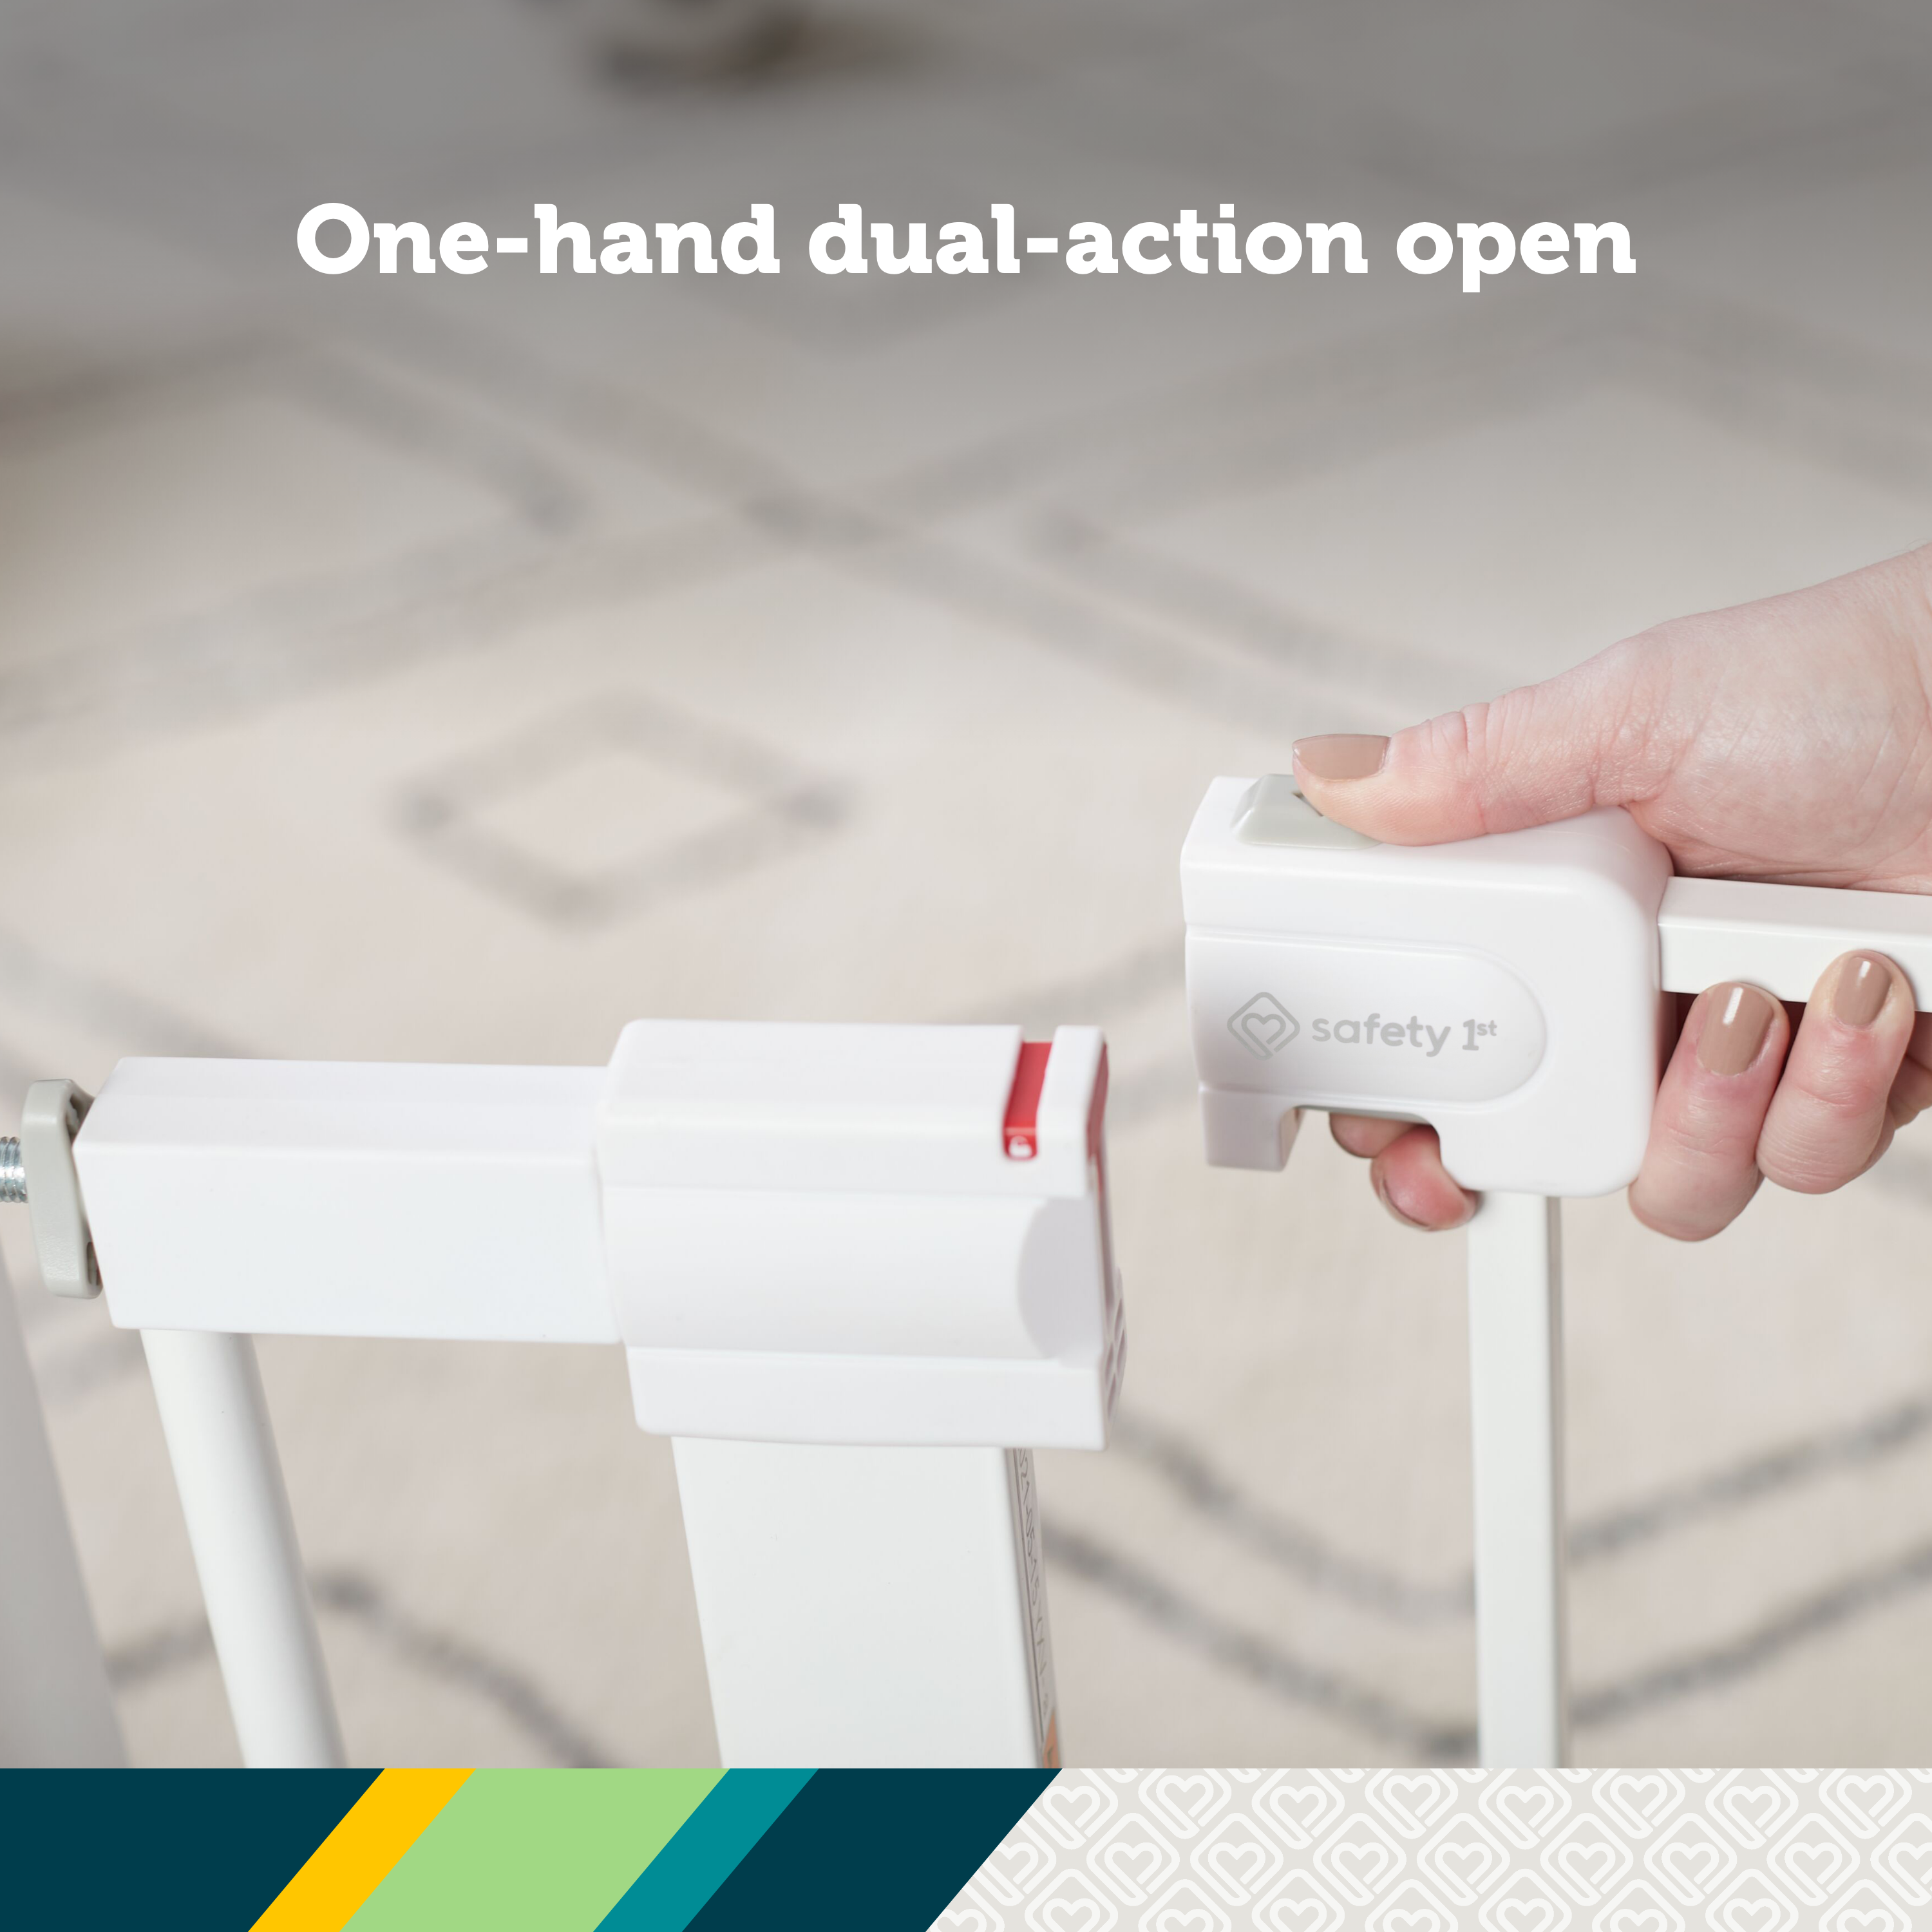 Easy Install Walk-Through Gate - one-hand dual-action open